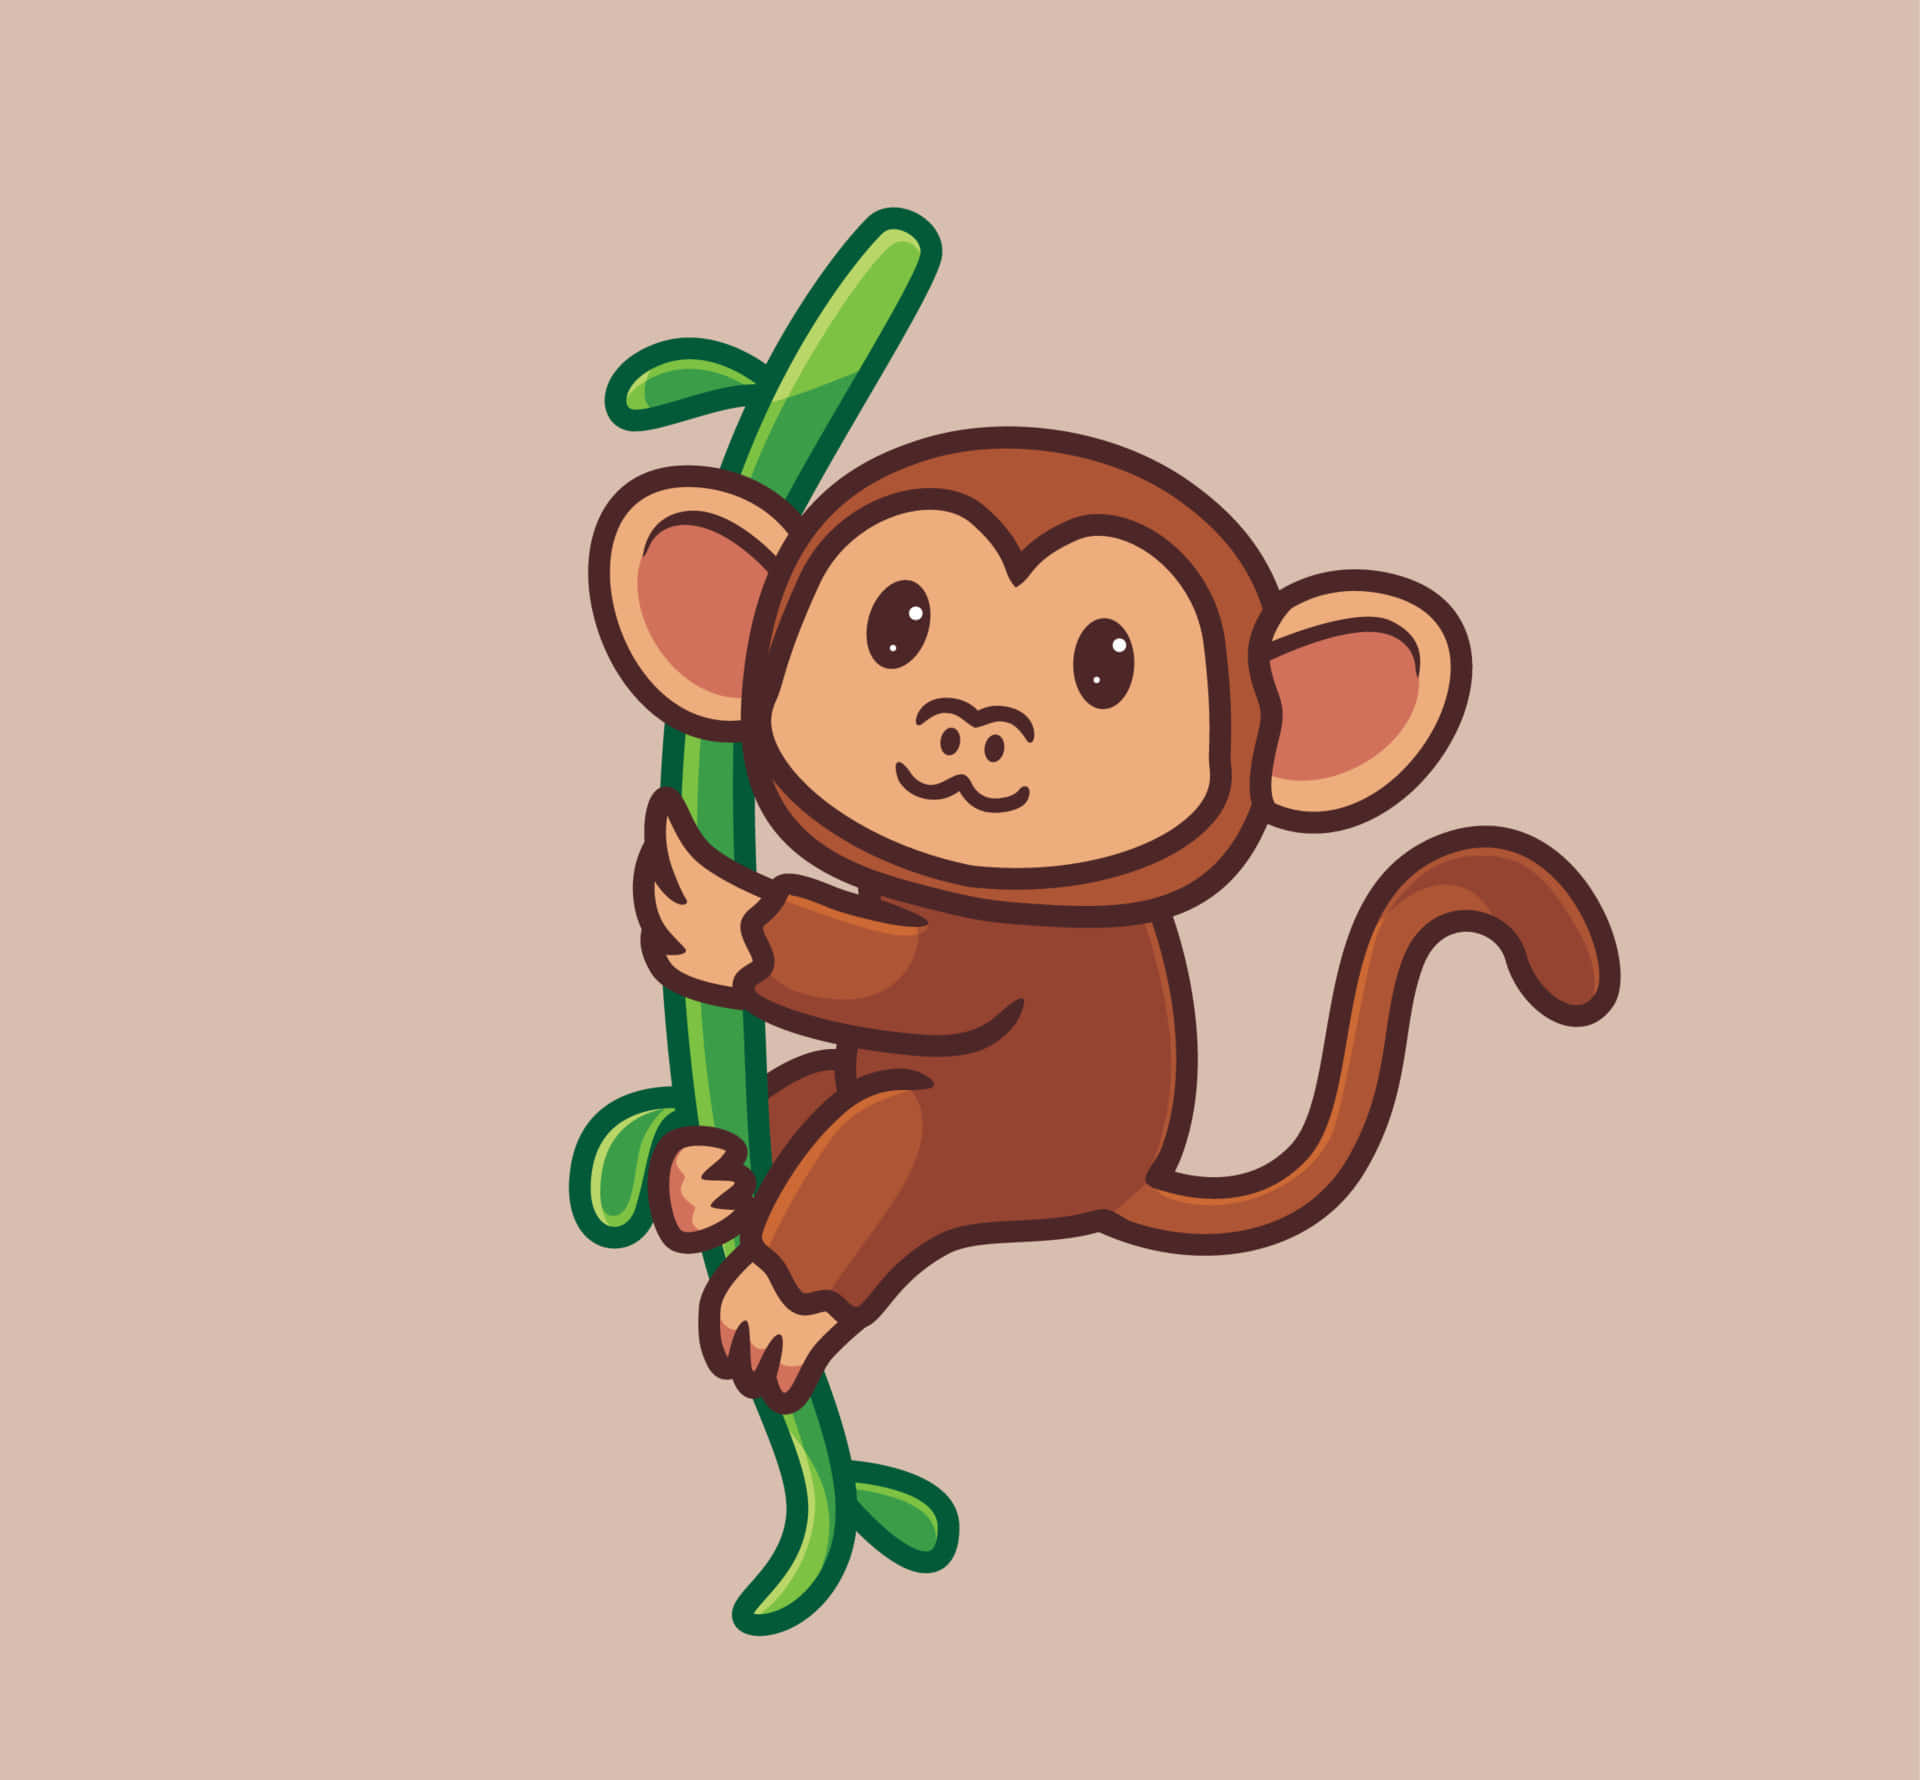 This Adorable Little Monkey is Ready for Some Monkey Business!